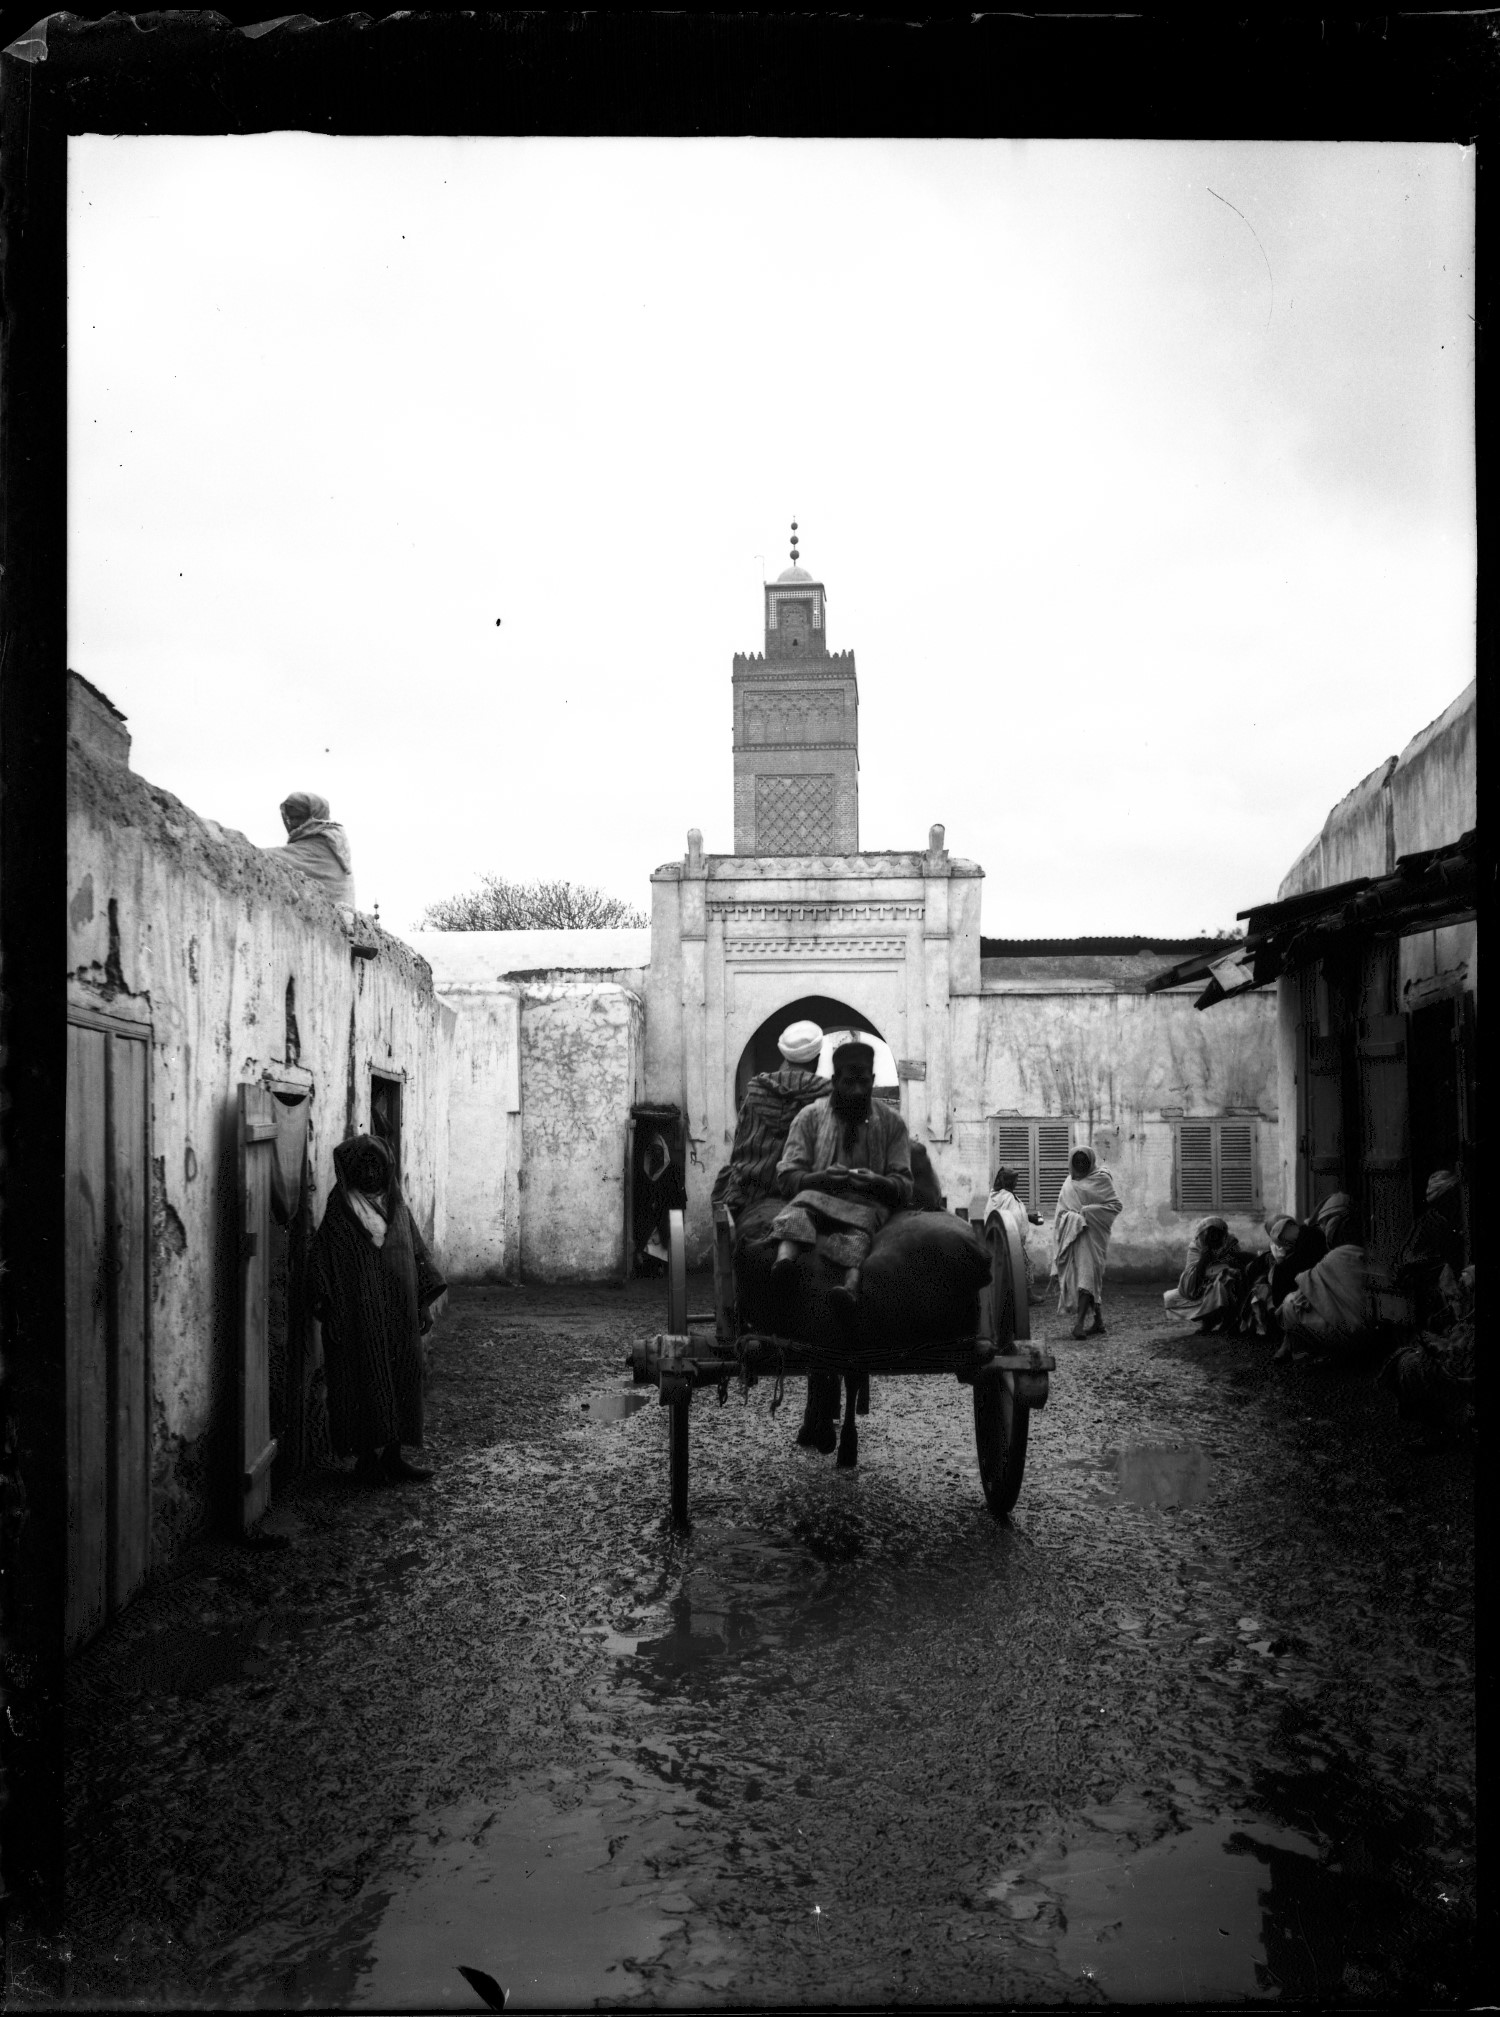 Wagon with people in traditional dress in medina road towards minaret and doorway/gate 